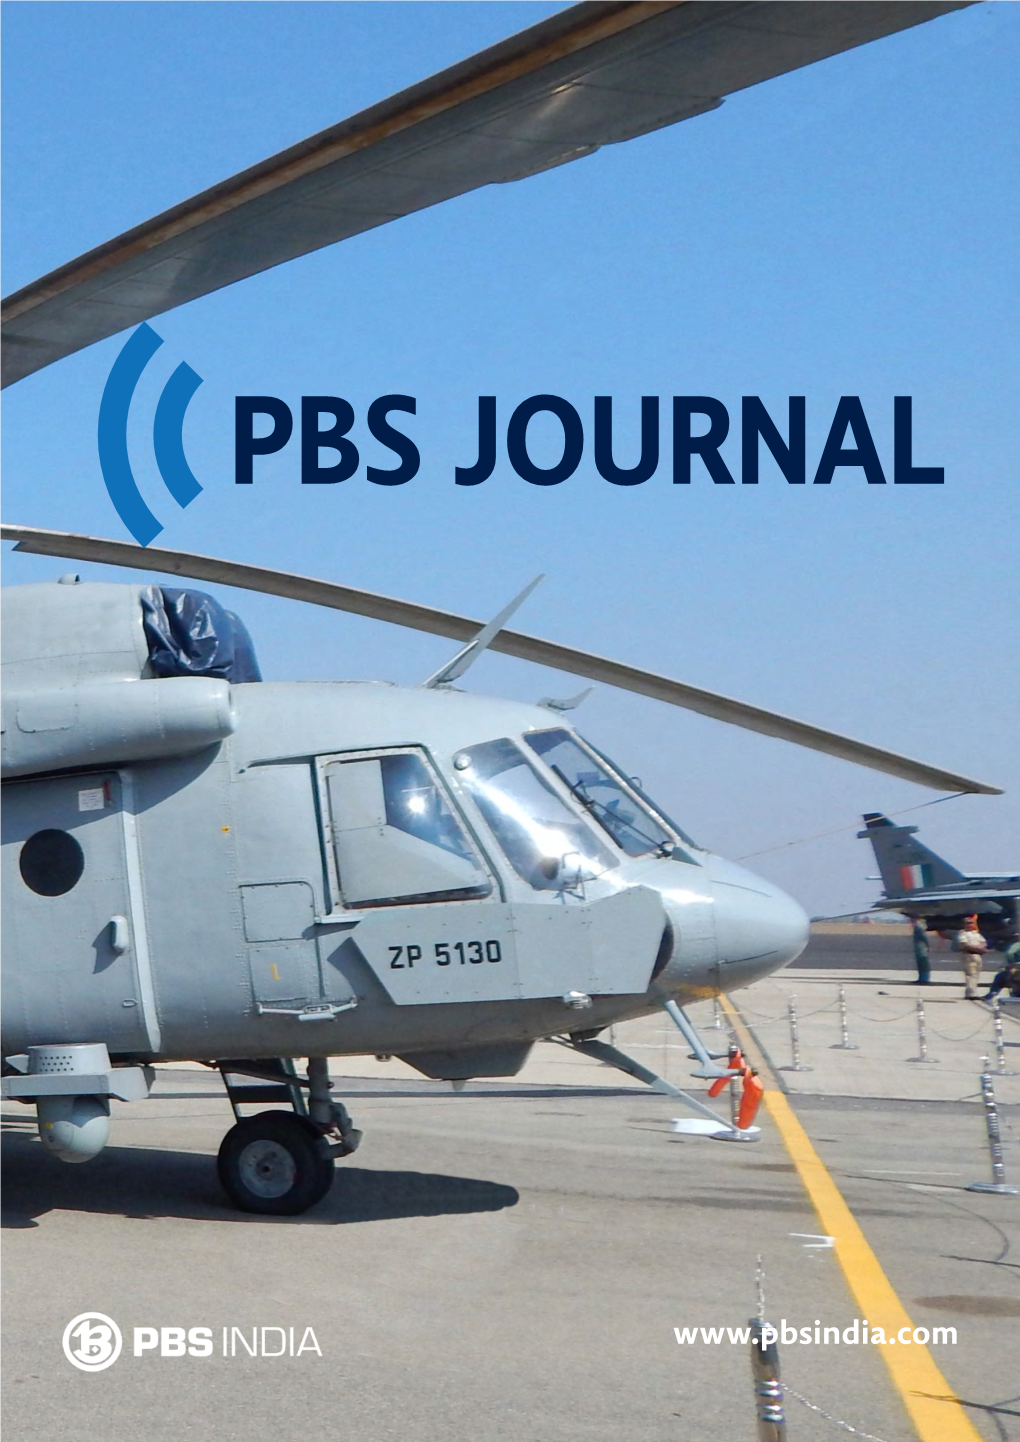 Pbs India Journal